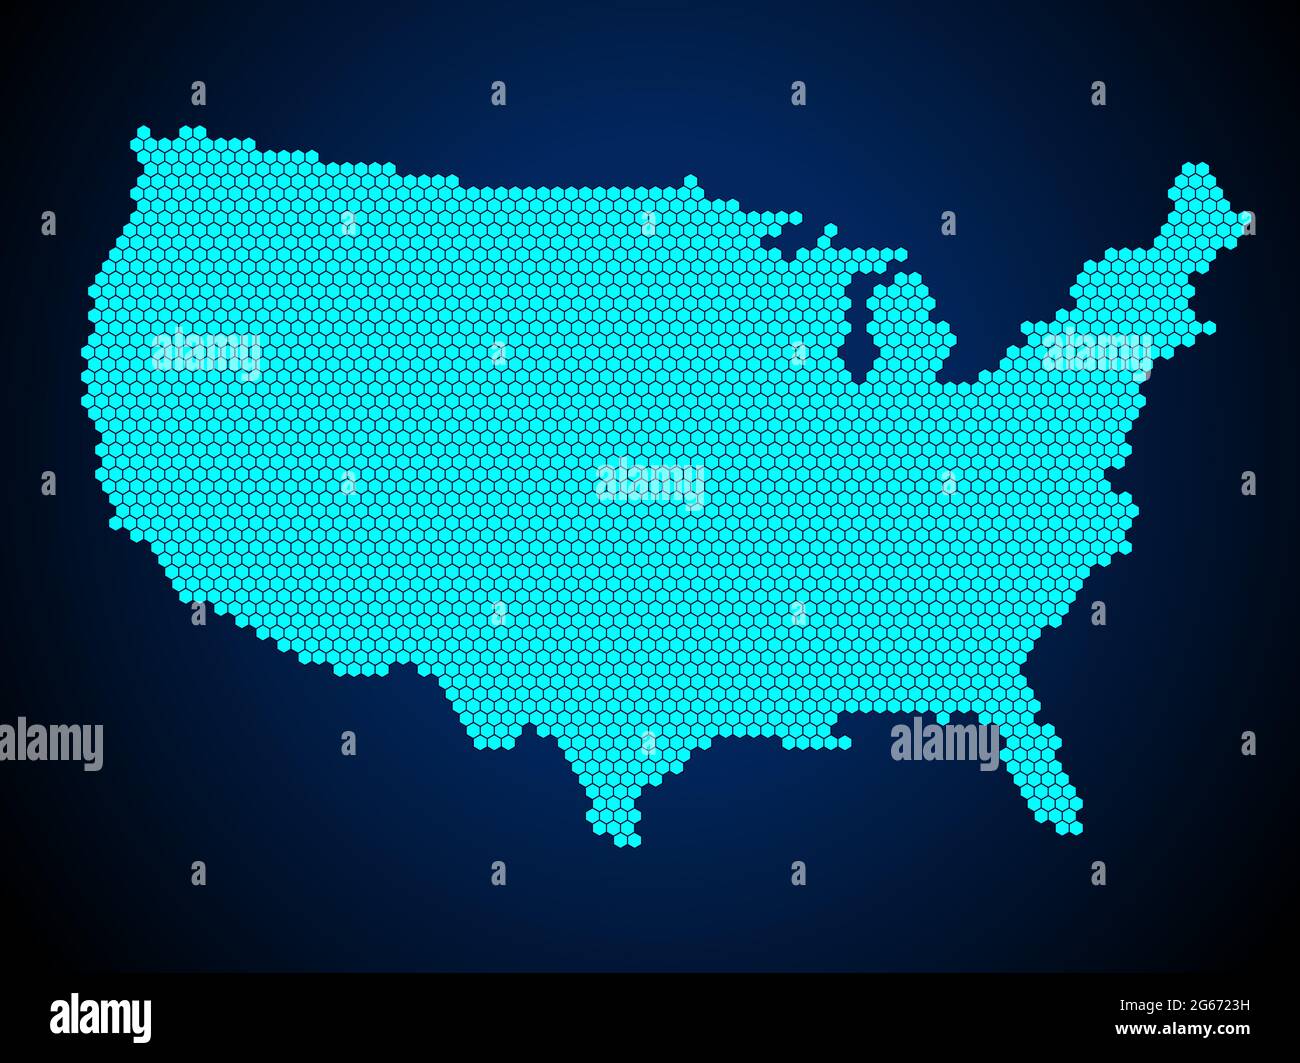 Honey Comb or Hexagon textured map of USA Country isolated on dark blue background - vector illustration Stock Vector